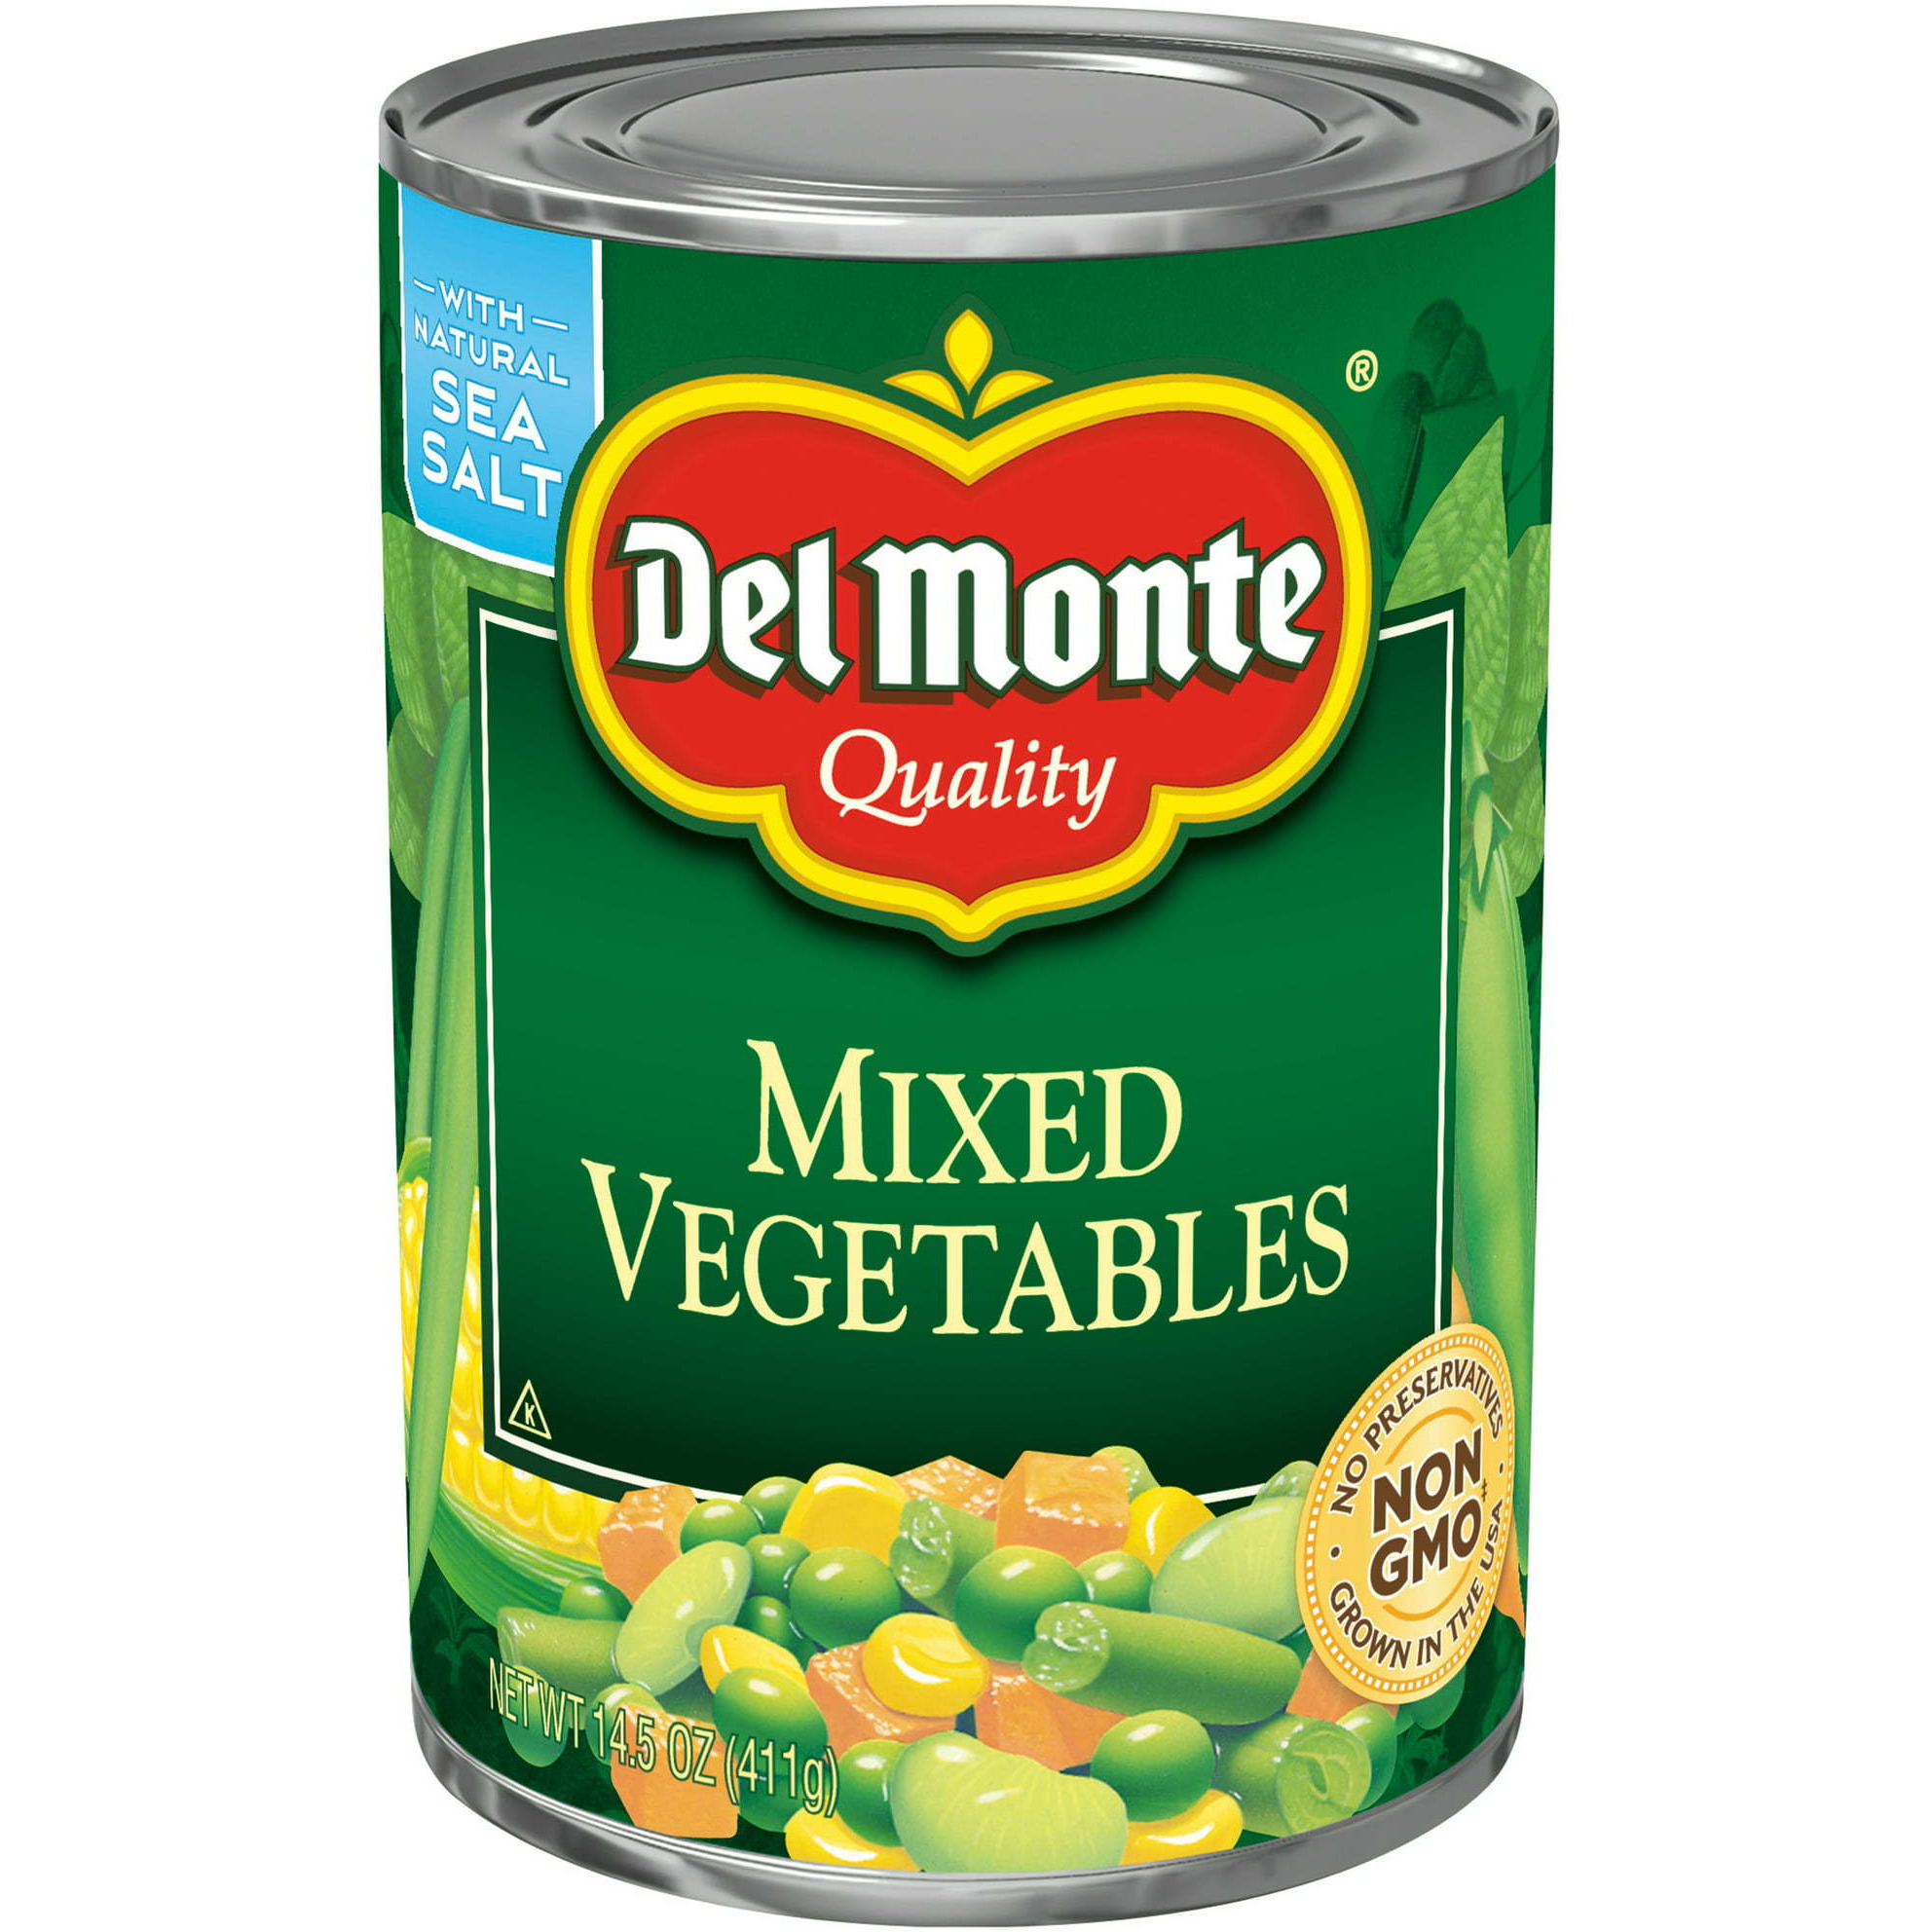 Case of 1 - Del Monte Mixed Vegetables - 14.5 Oz (411 Gm) [50% Off]